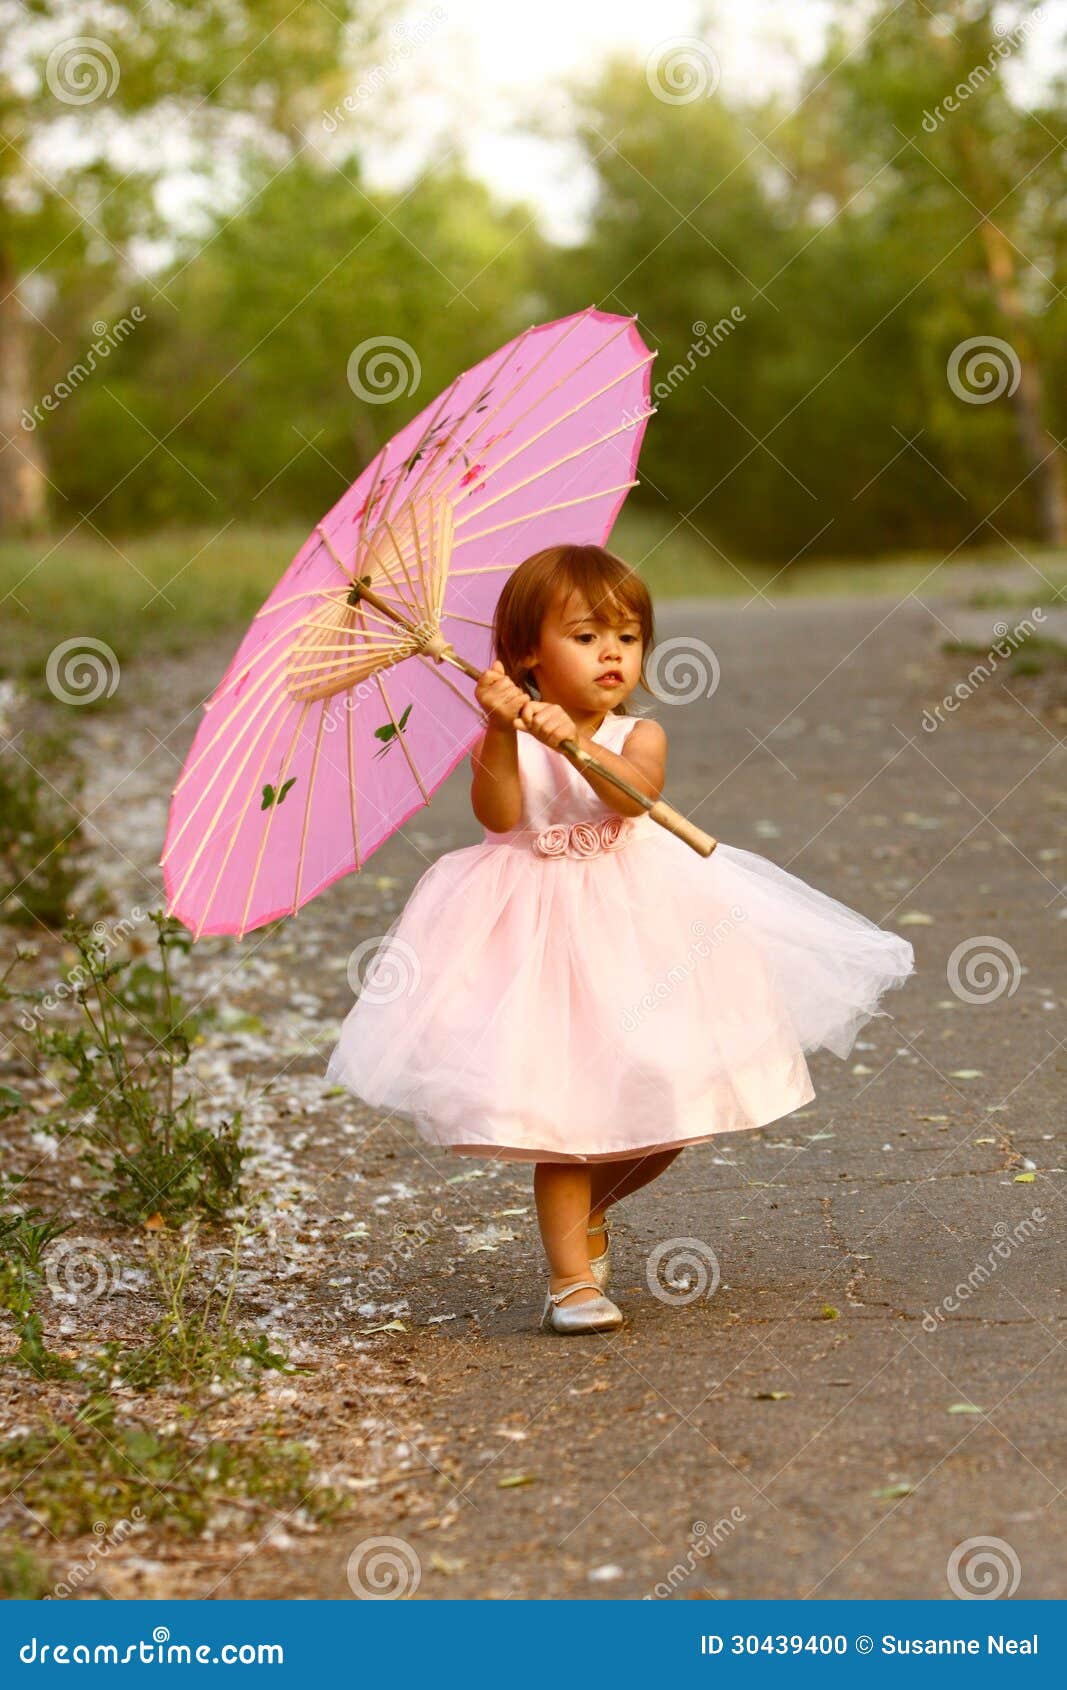 dressy two-year-old girl carrying pink parasol